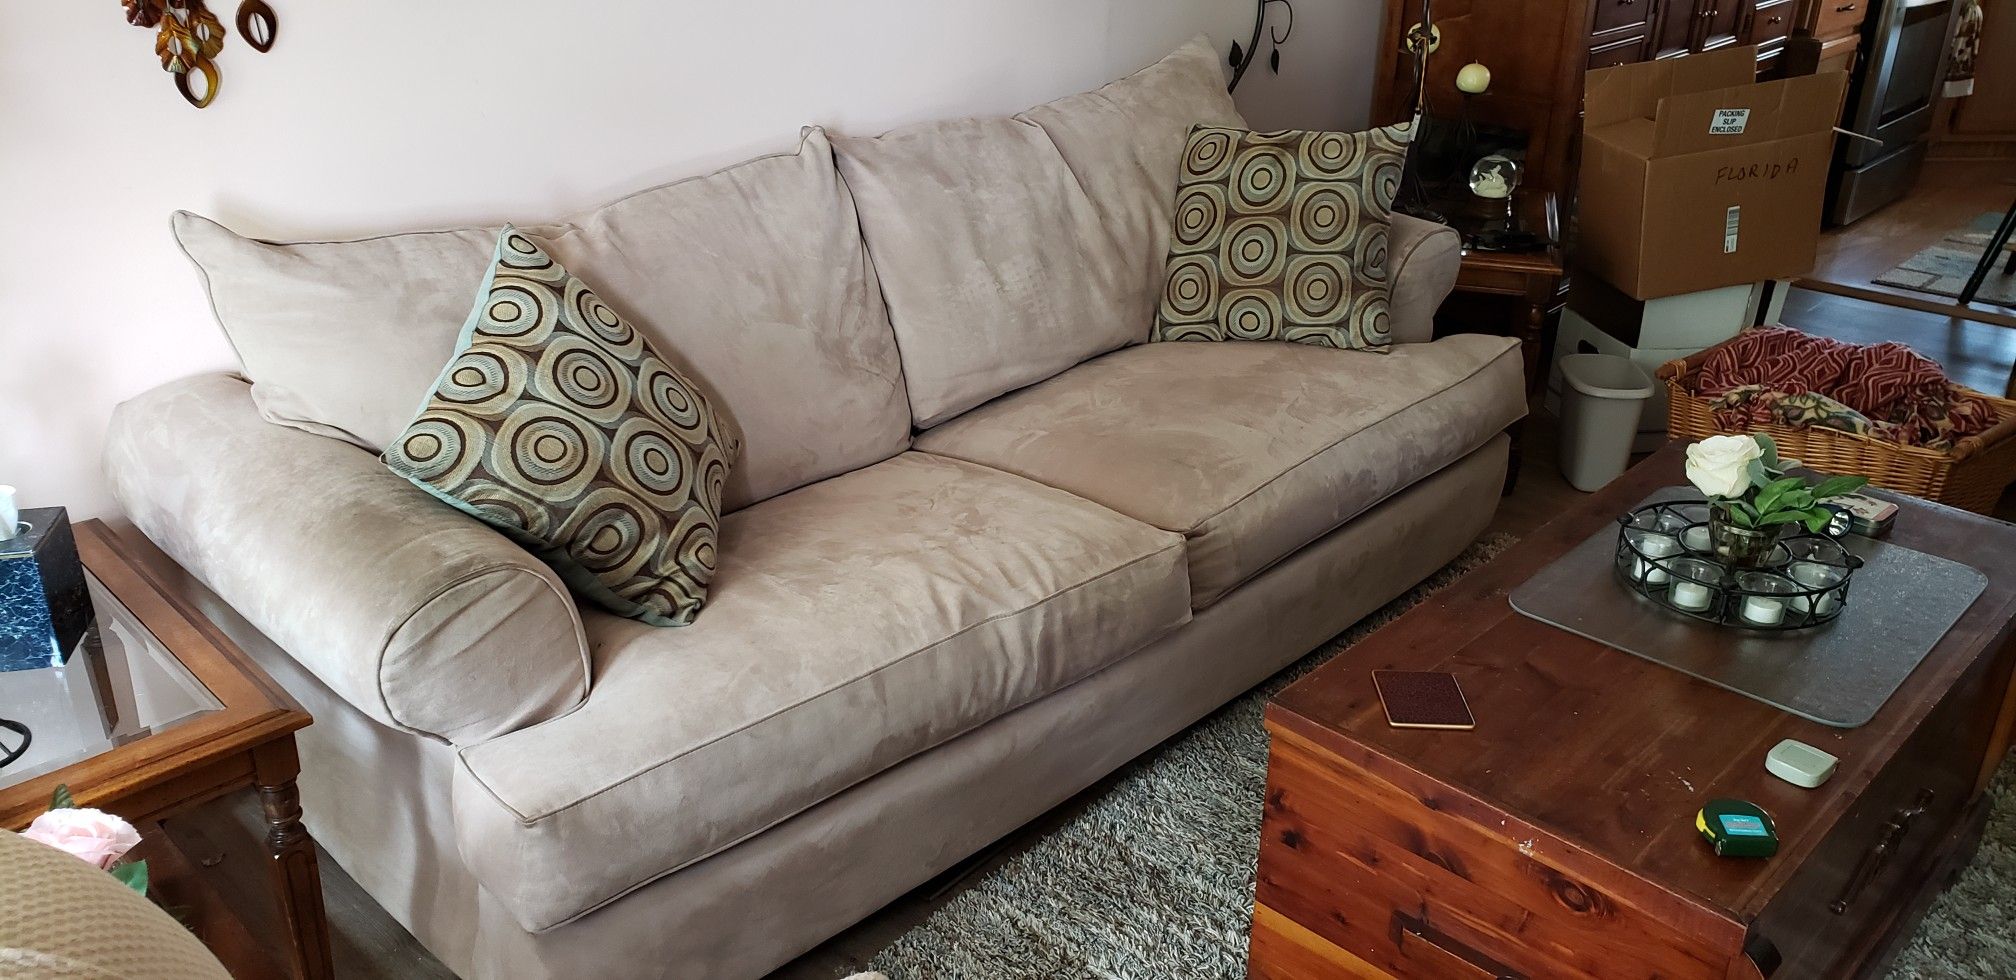 FREE !! .. Sofa Bed Couch ..